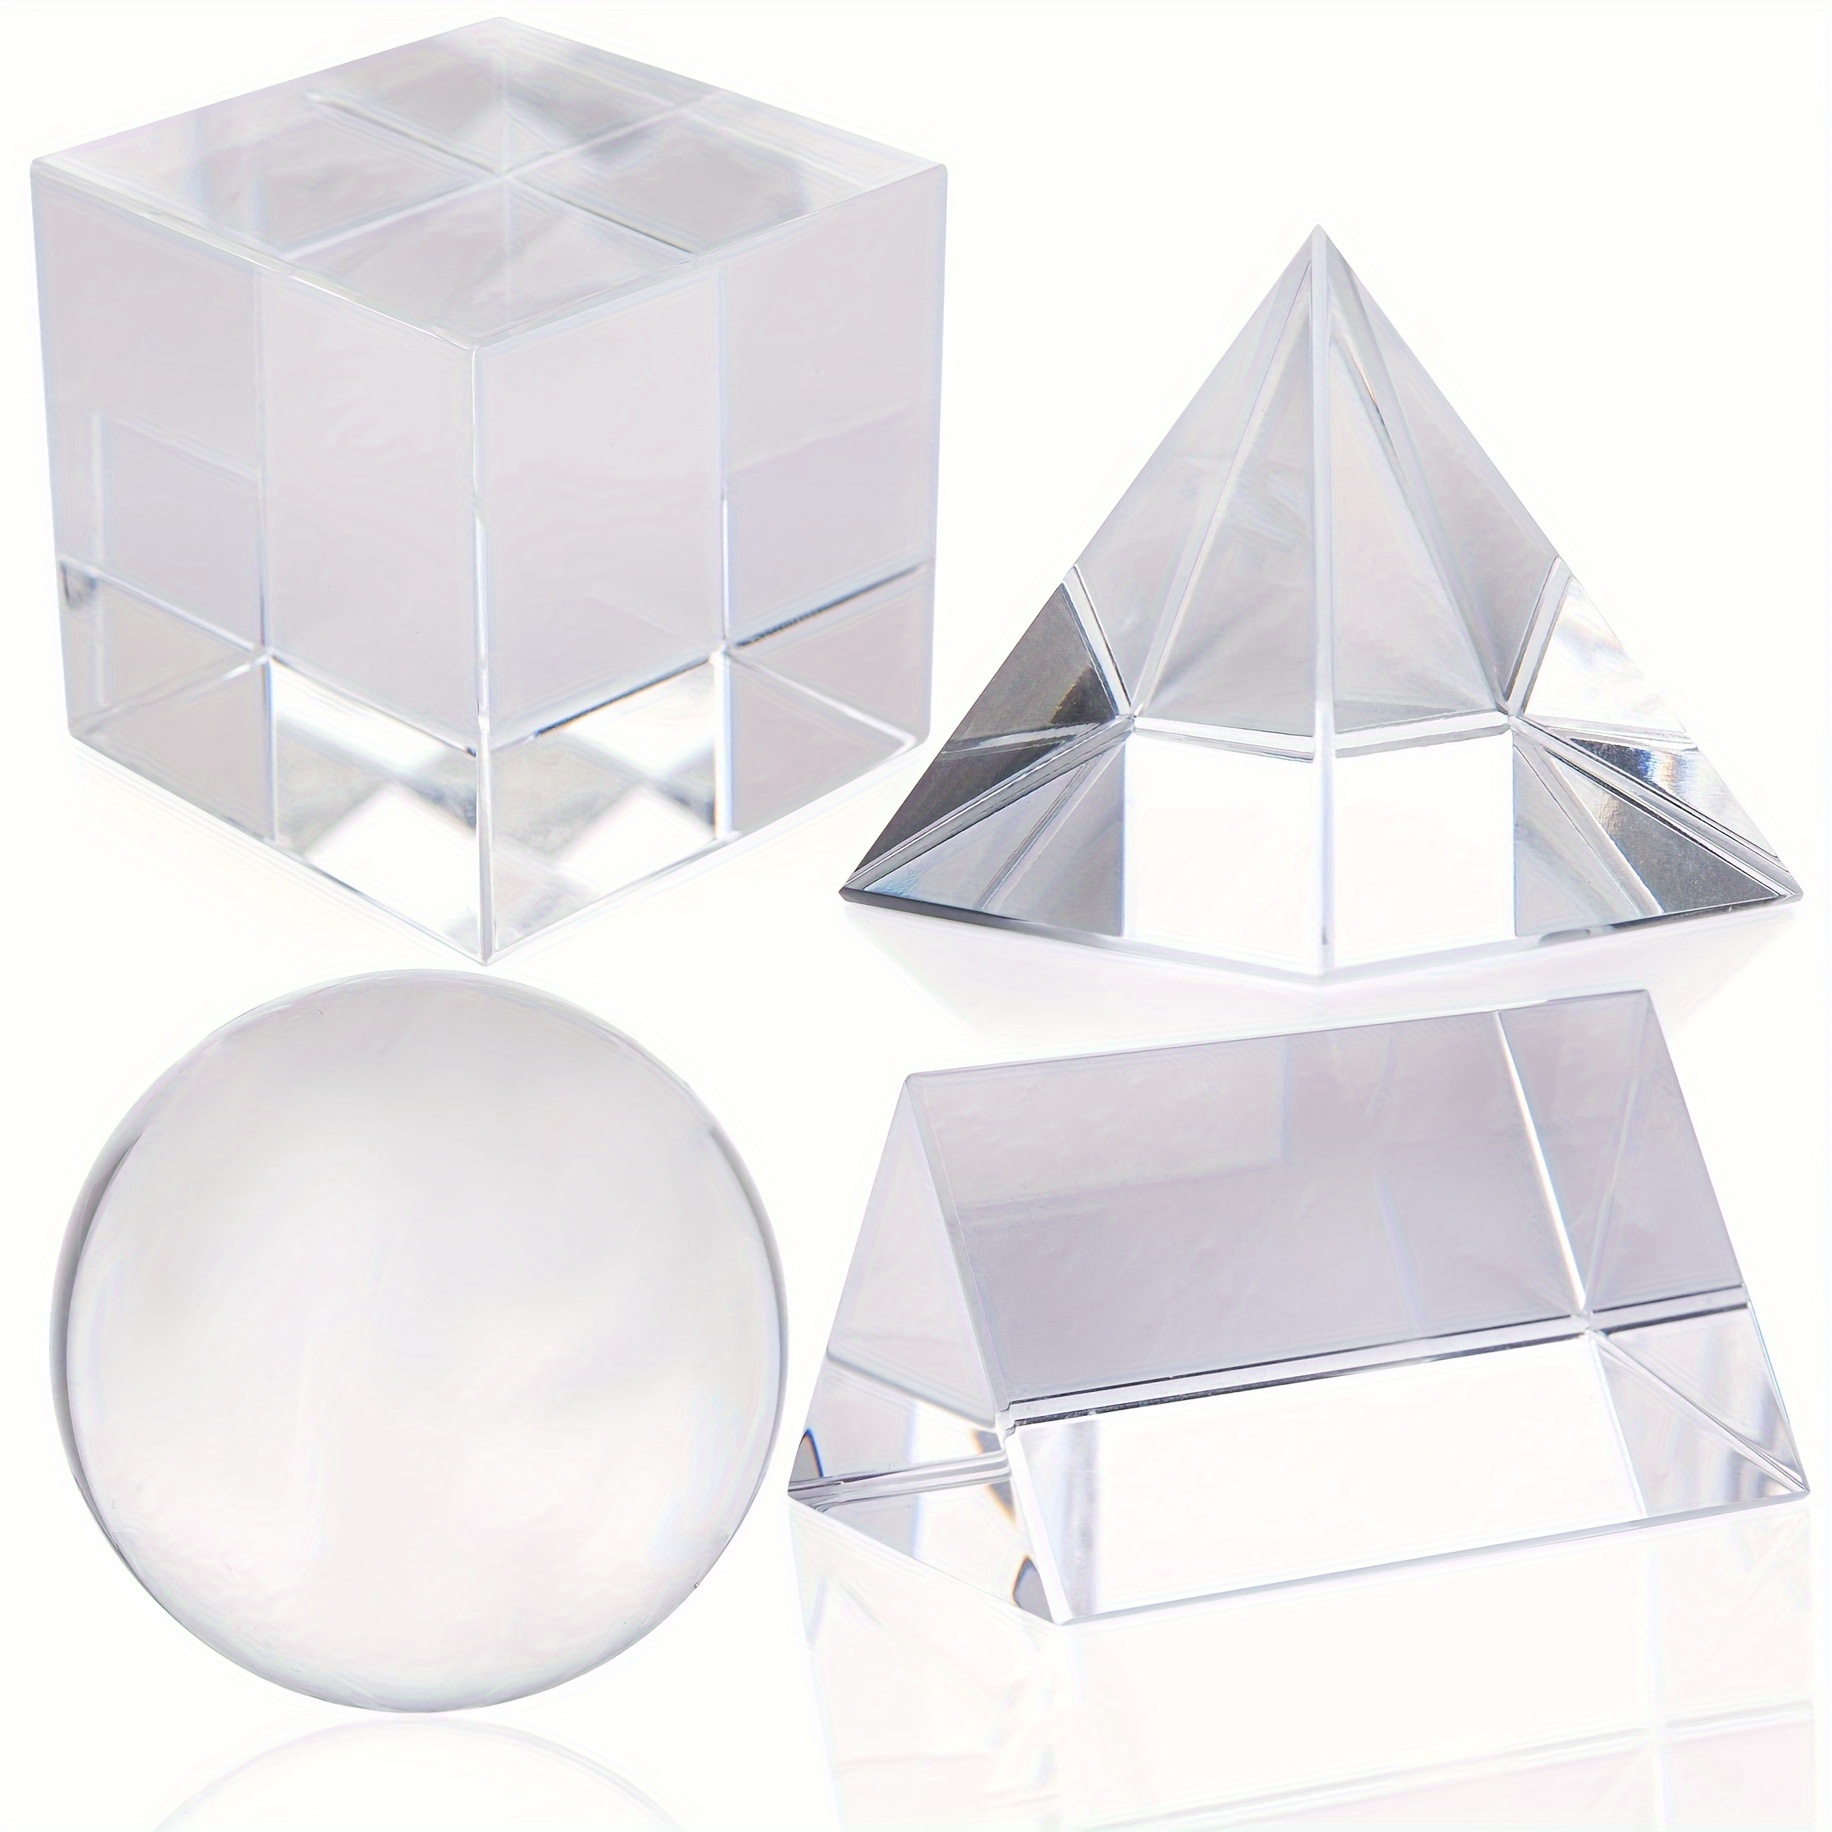 

K9 Optical Crystal Prism Set Of 4, Glass Prisms For Education, Physics, Experiments, And Photography